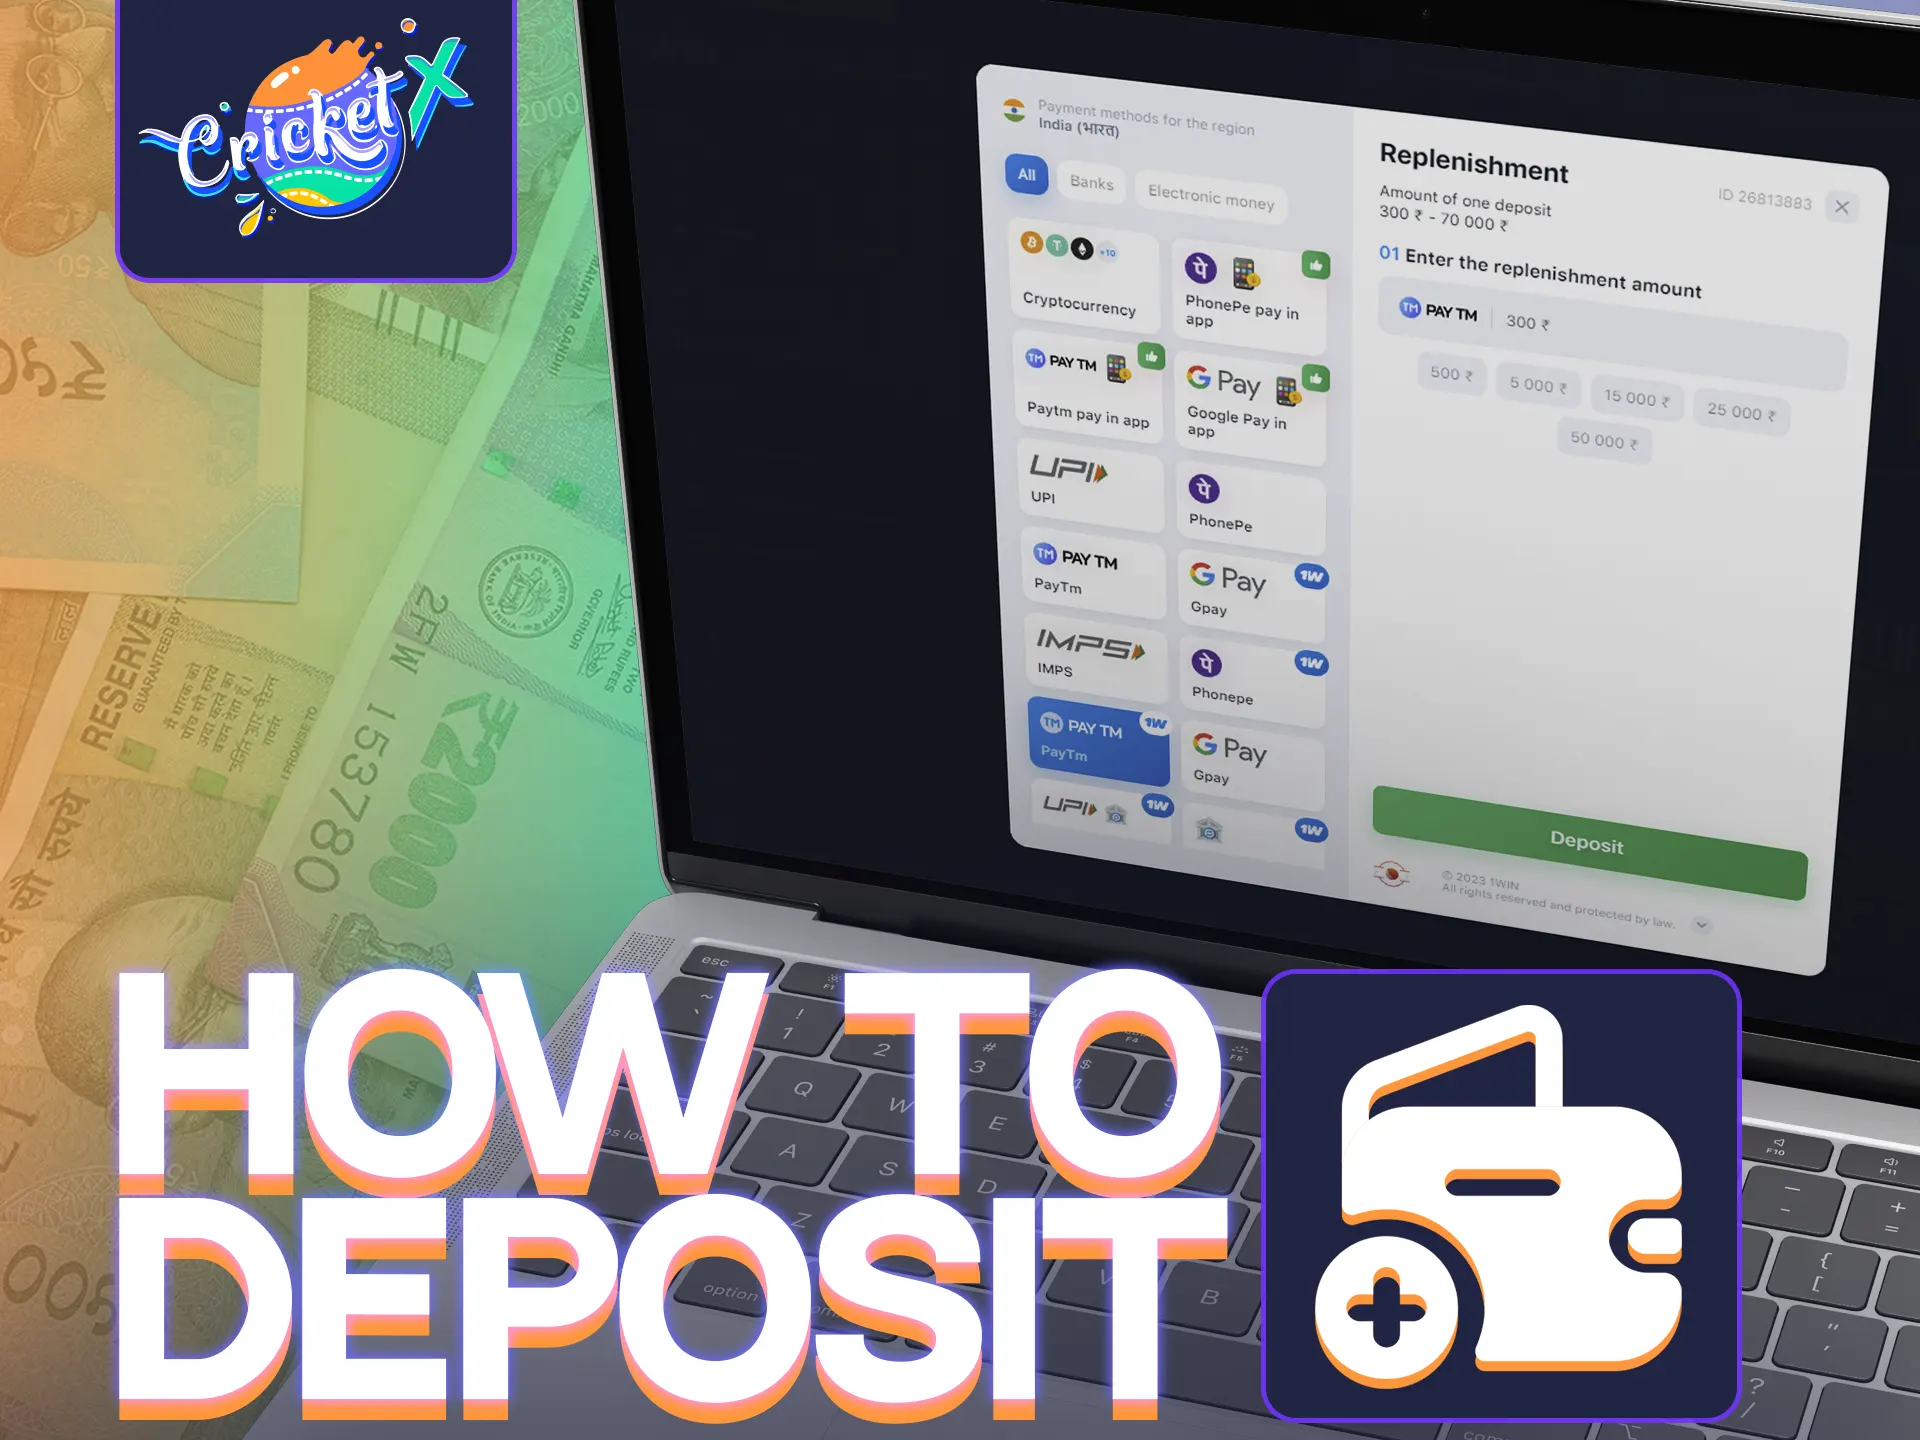 Learn how to make a deposit for the Cricketx game.